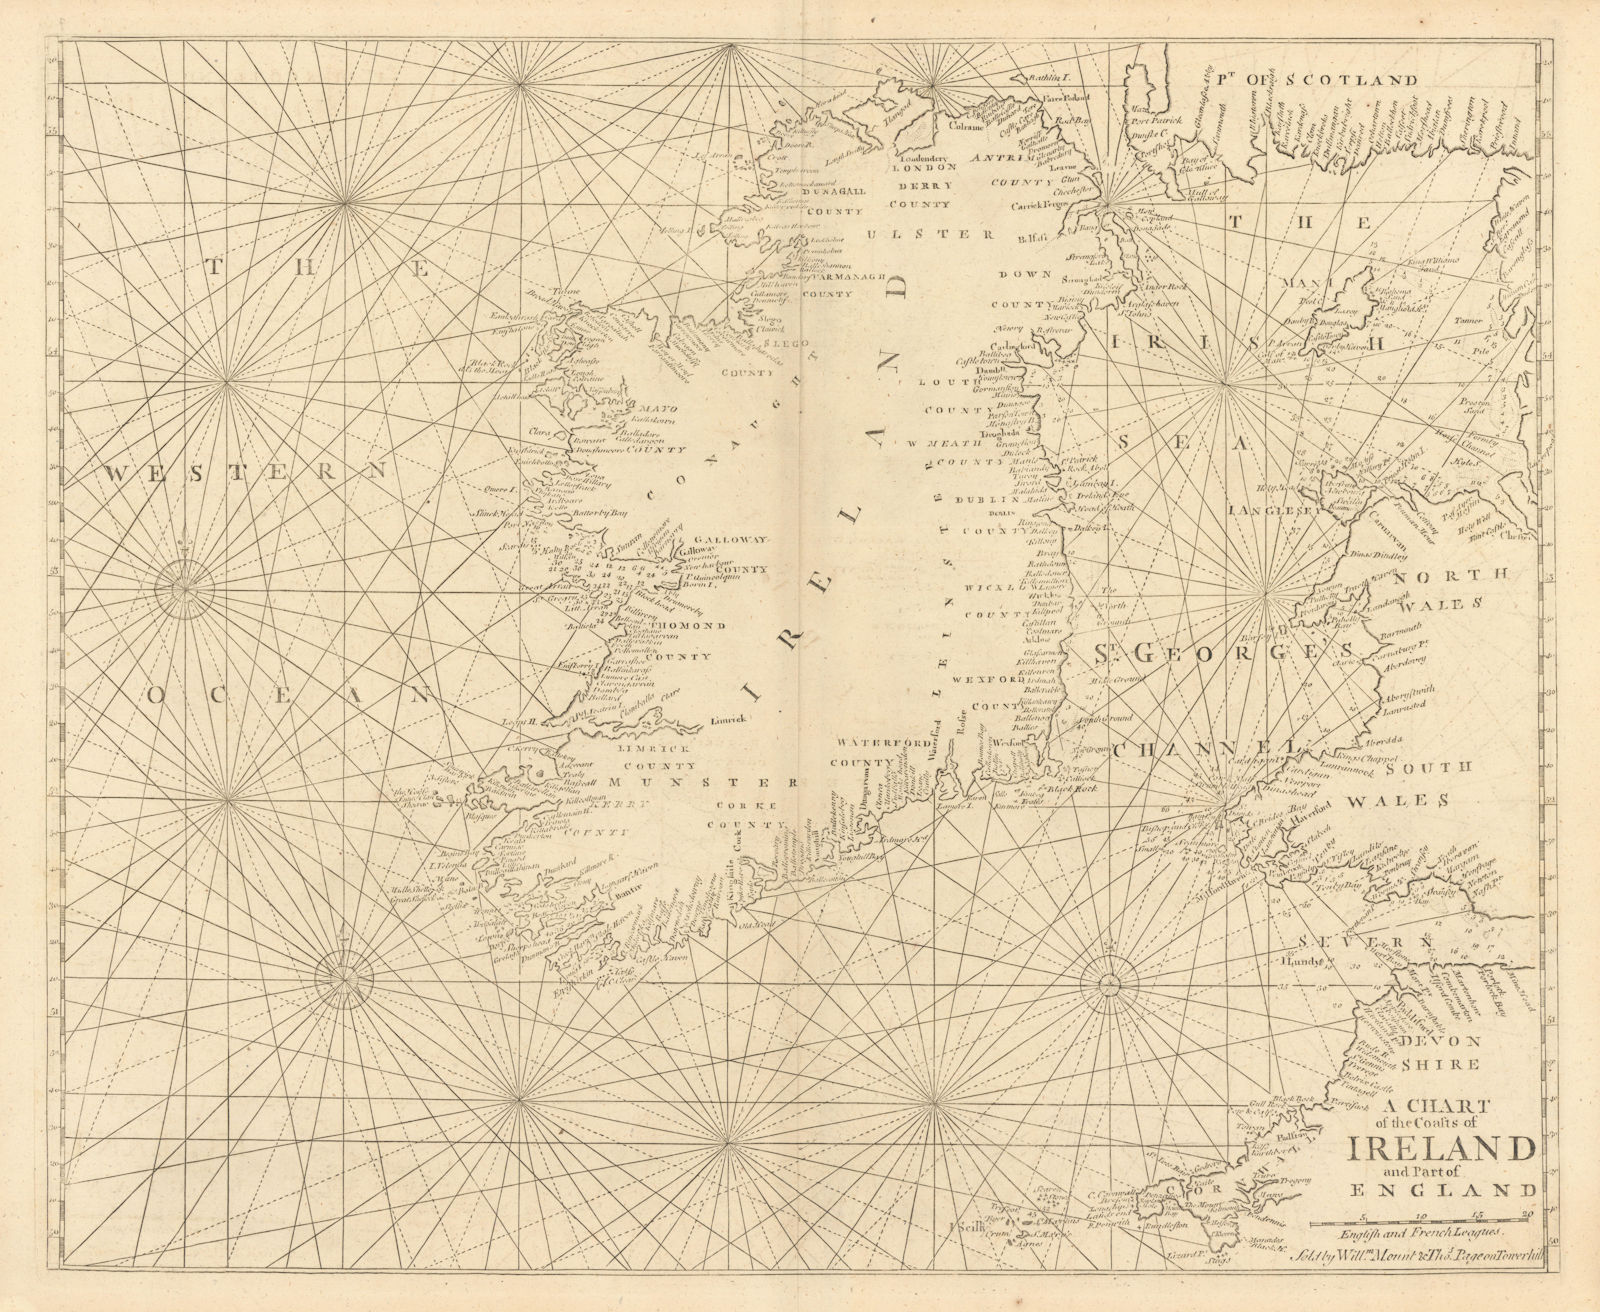 Associate Product A Chart of the Coasts of Ireland & part of England. Wales. MOUNT & PAGE 1758 map